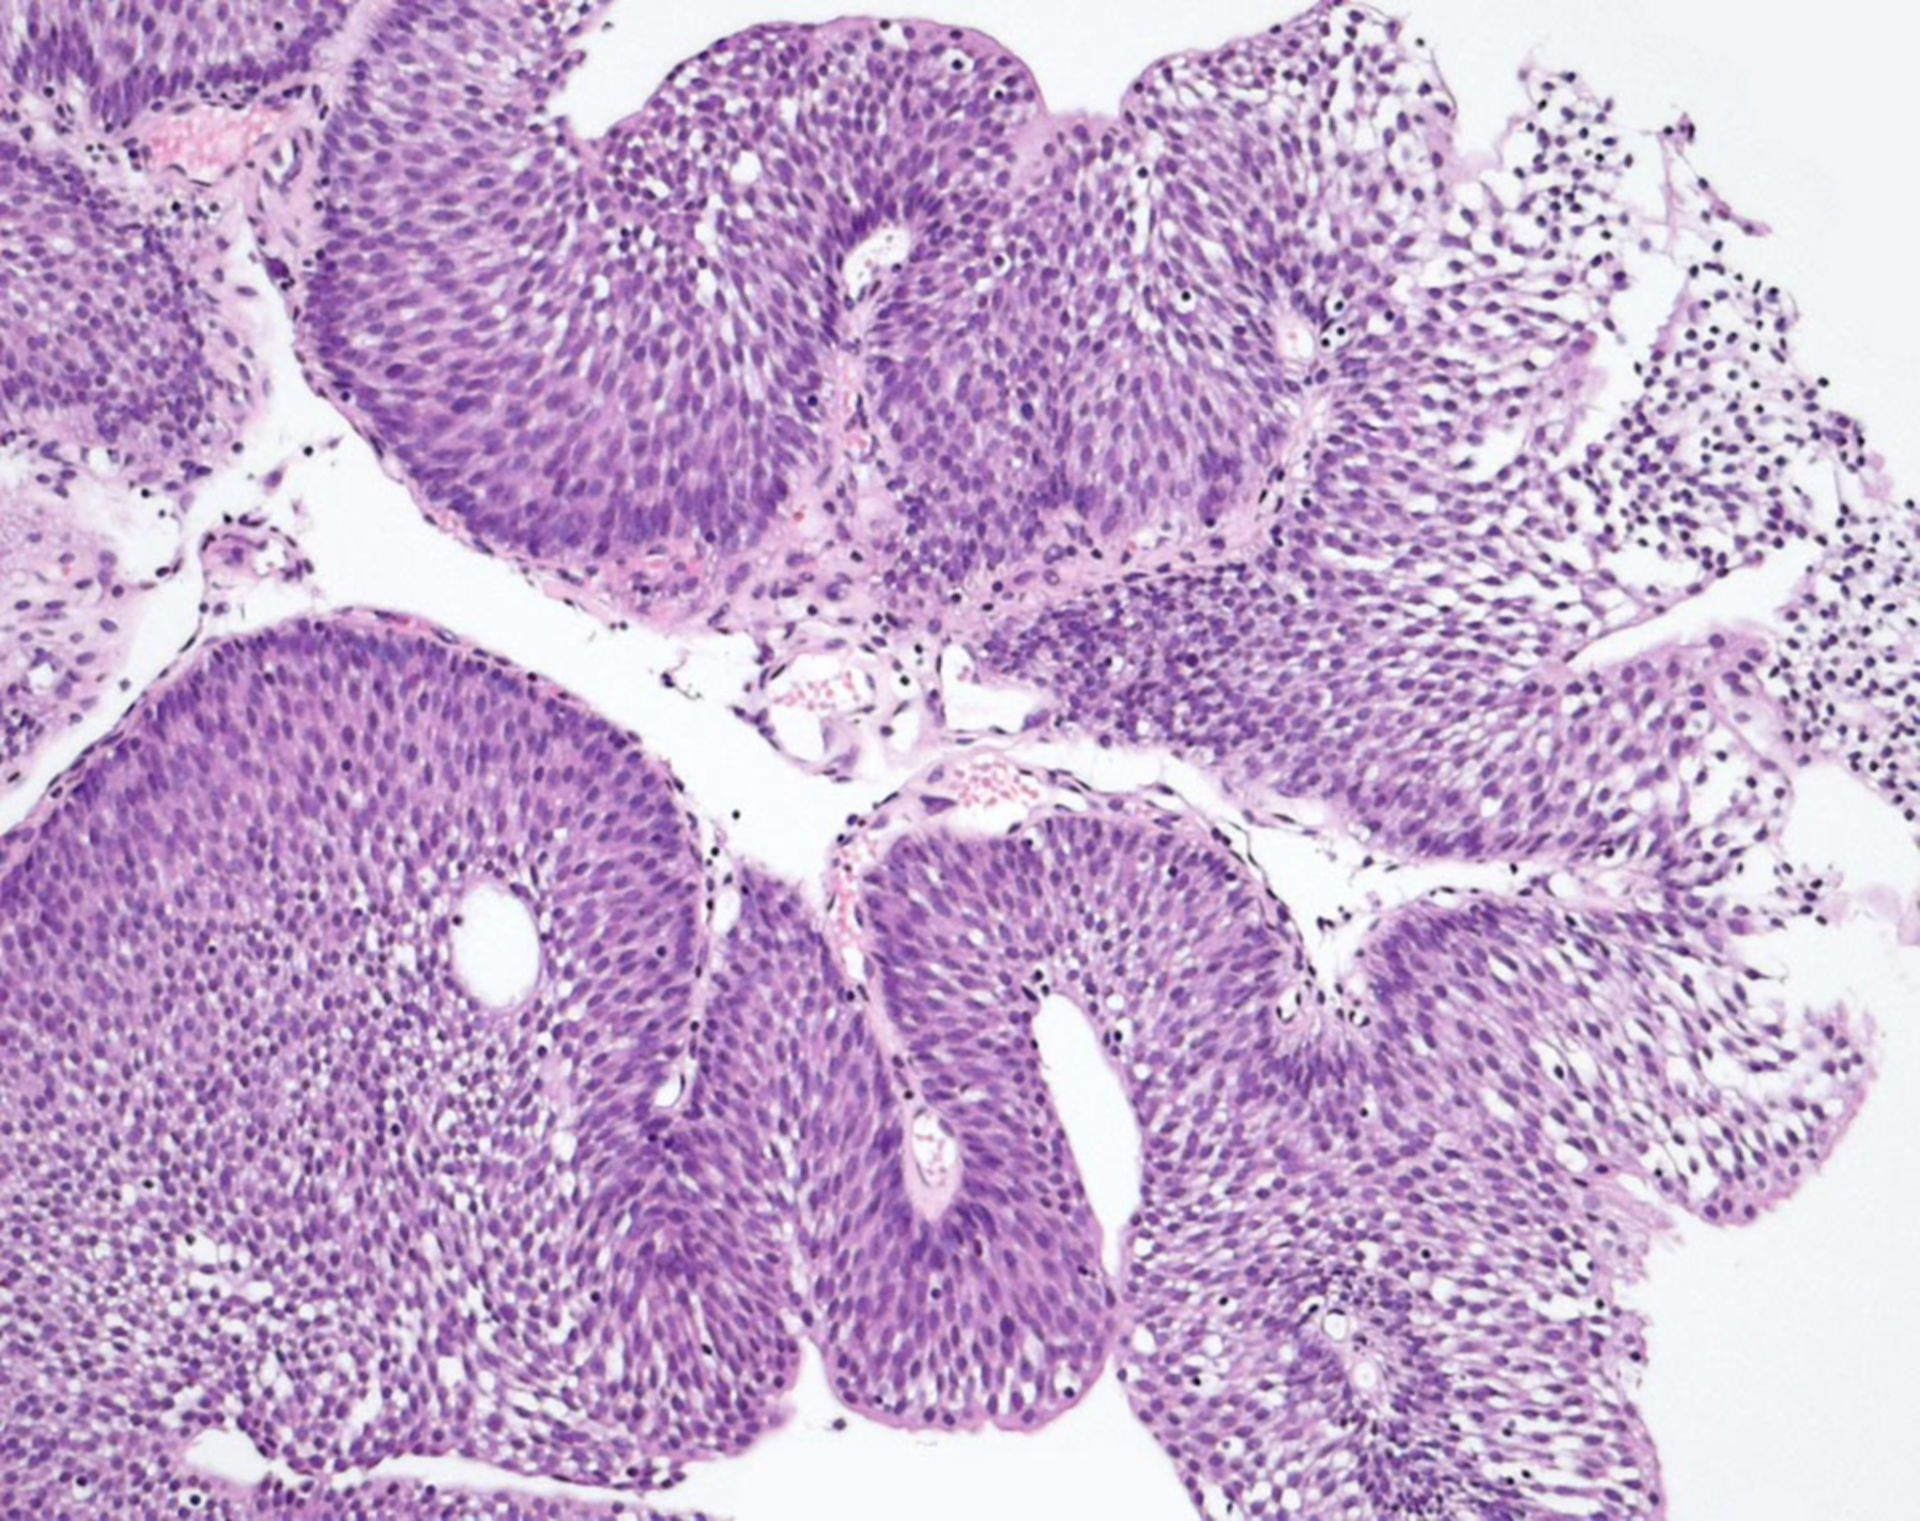 papillary urothelial neoplasm of low malignant potential